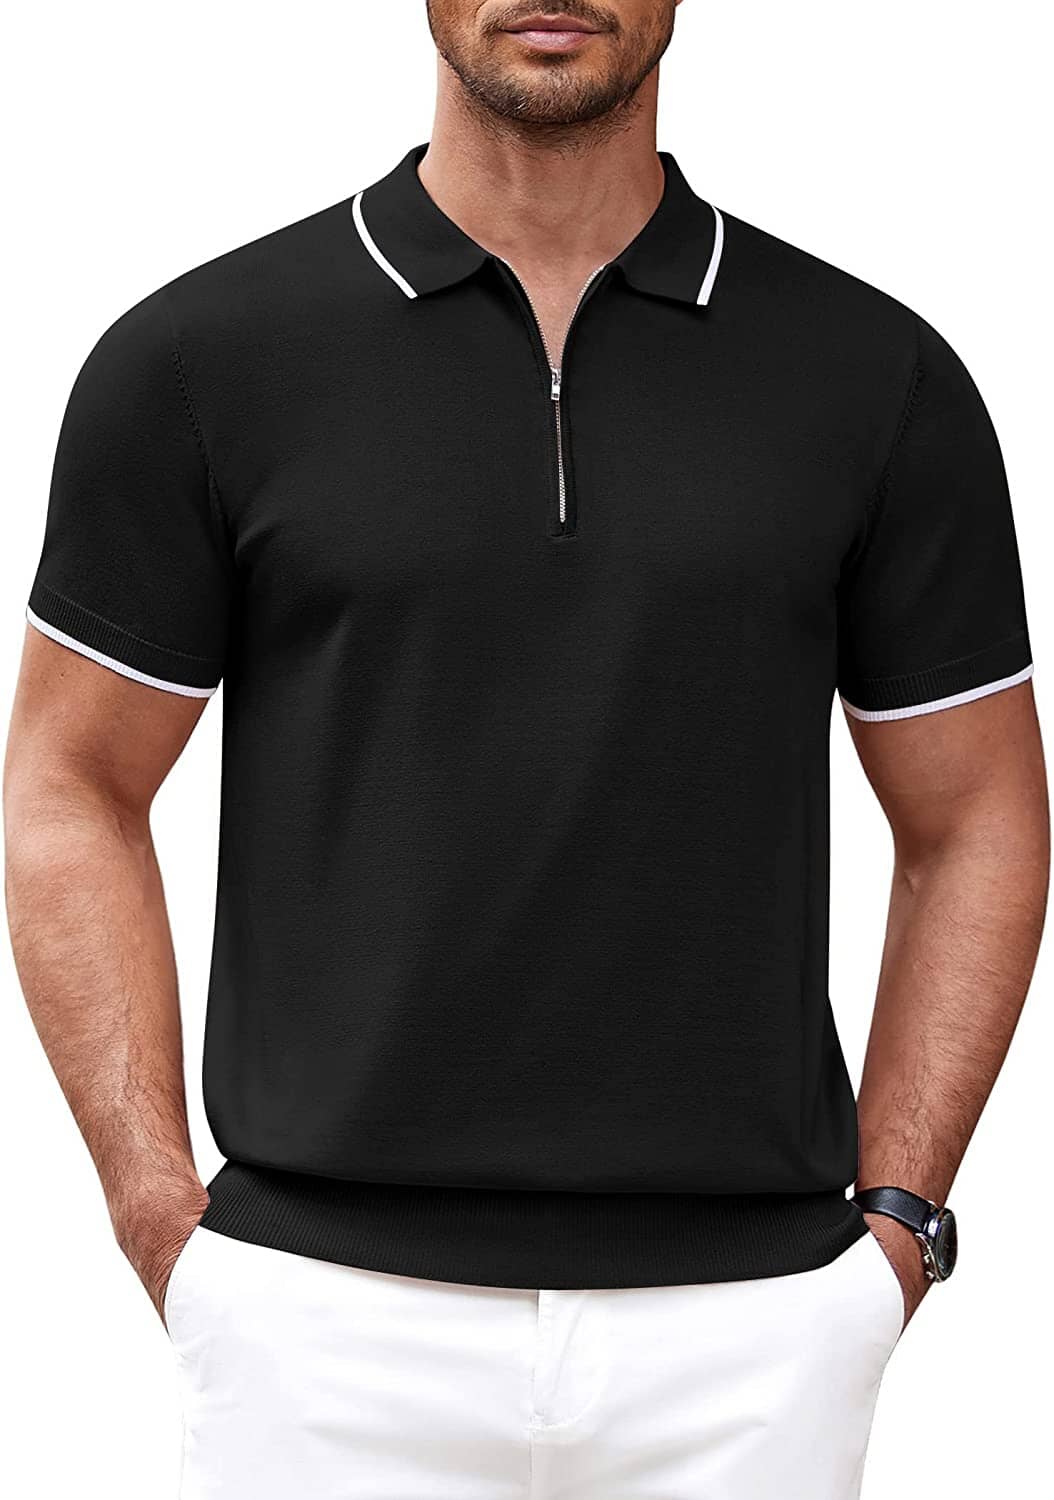 Classic Zipper Short Sleeve Polo Shirt (US Only) Polos COOFANDY Store Black S 